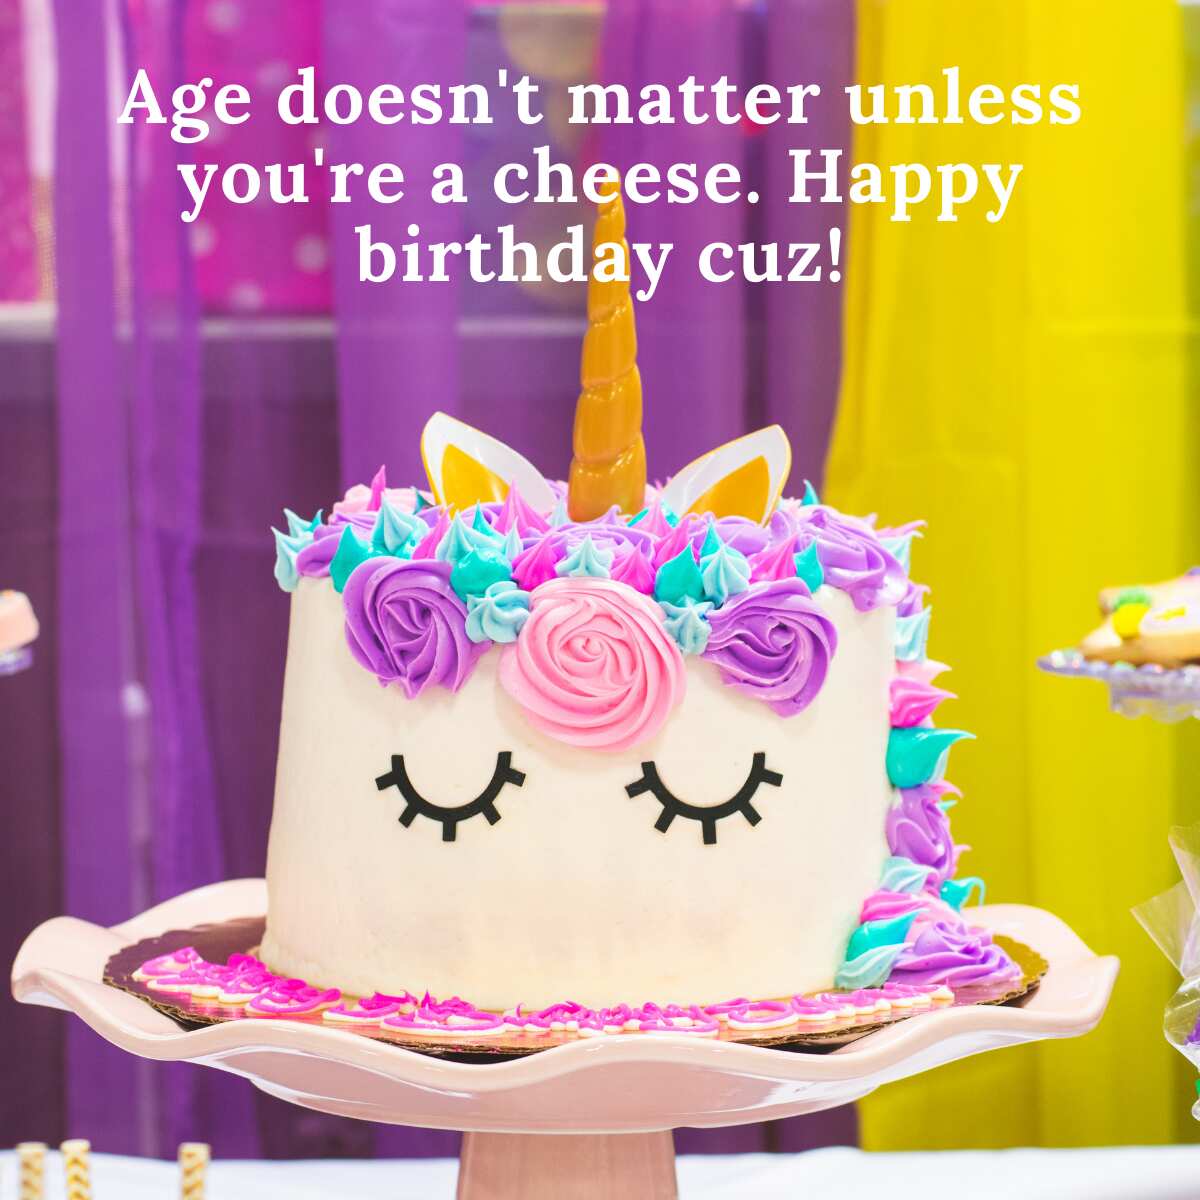 50+ amusing happy birthday cousin wishes, memes and images - SESO OPEN